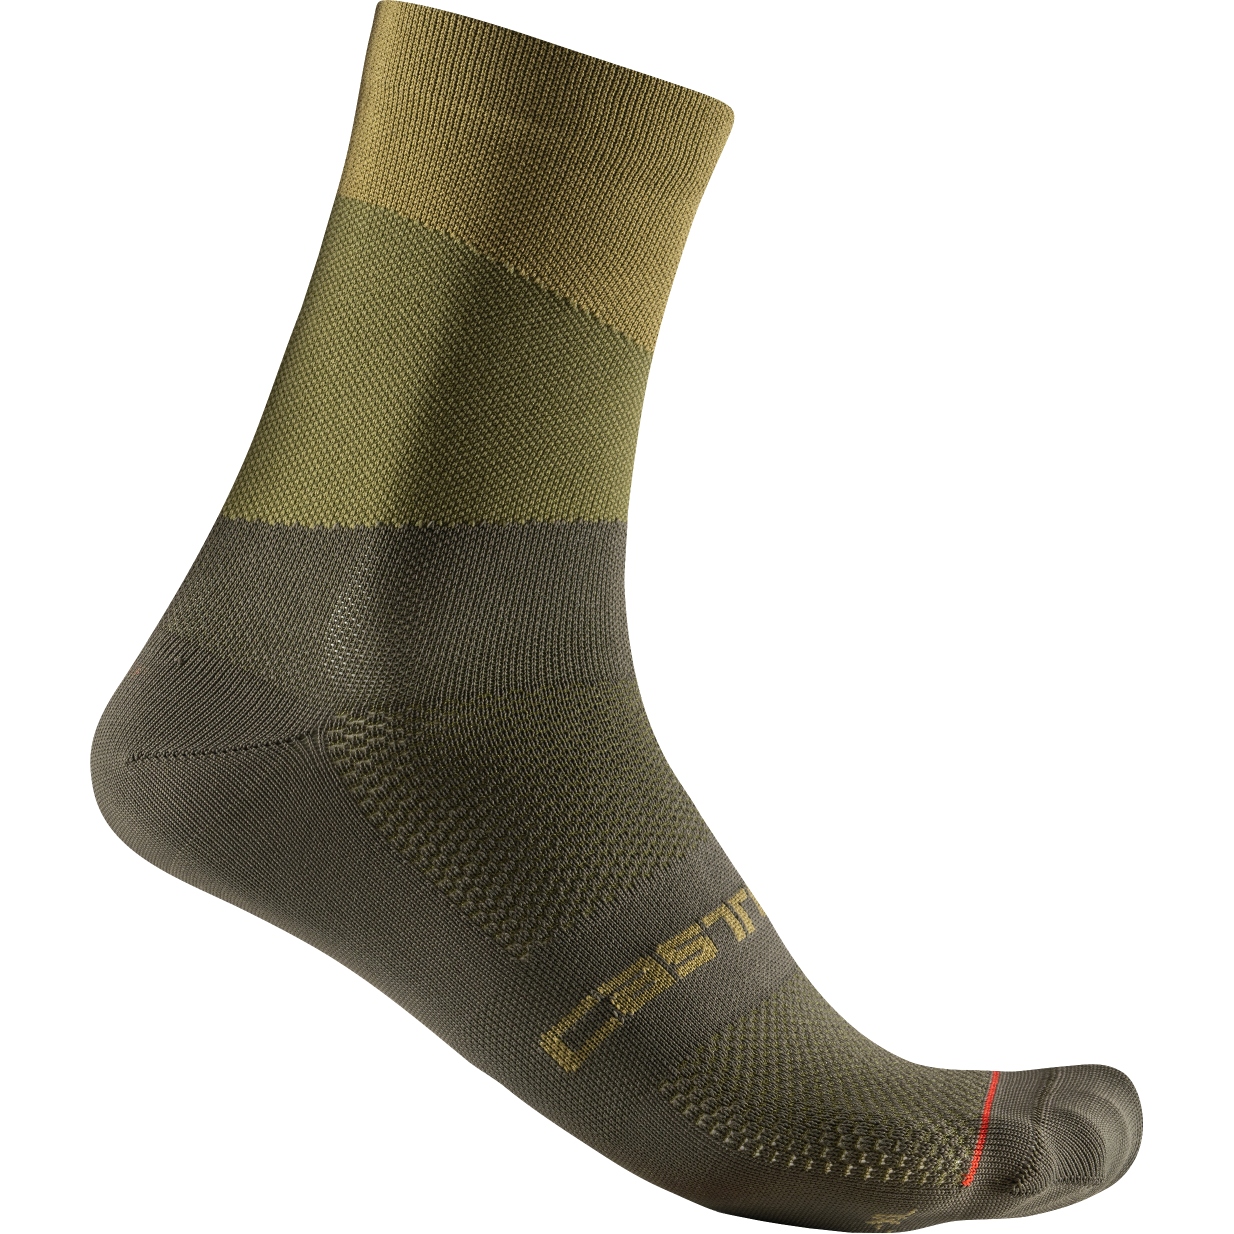 Picture of Castelli Orizzonte 15 Socks - sage/deep green 310